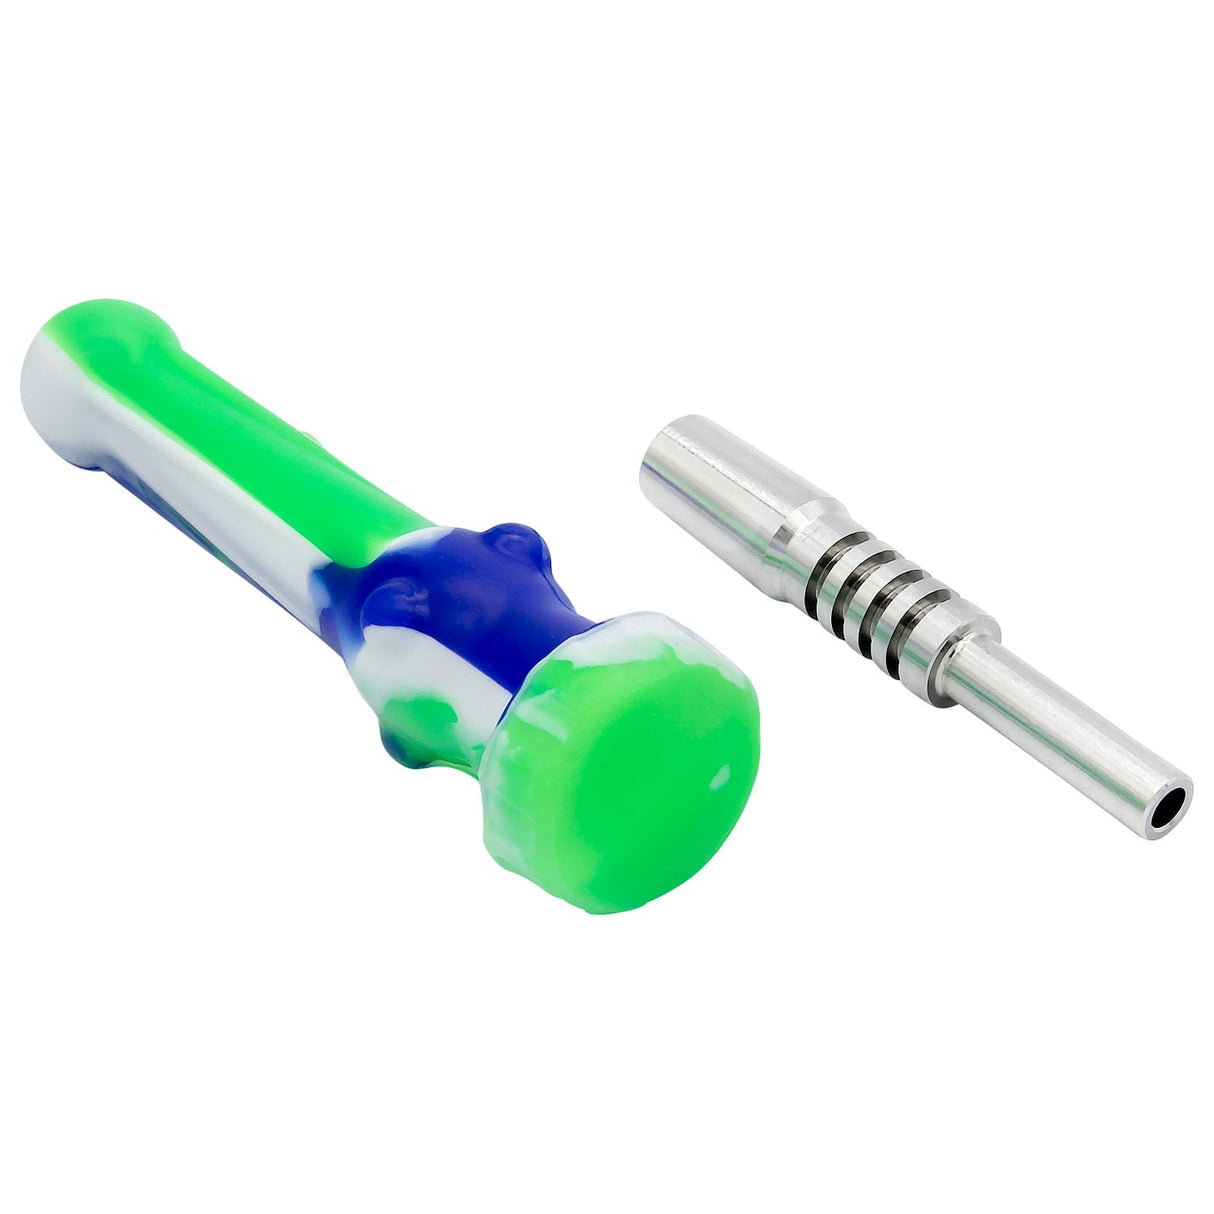 Rupert's Drop Dab Vapor Straw with solid titanium tip and green-blue silicone body